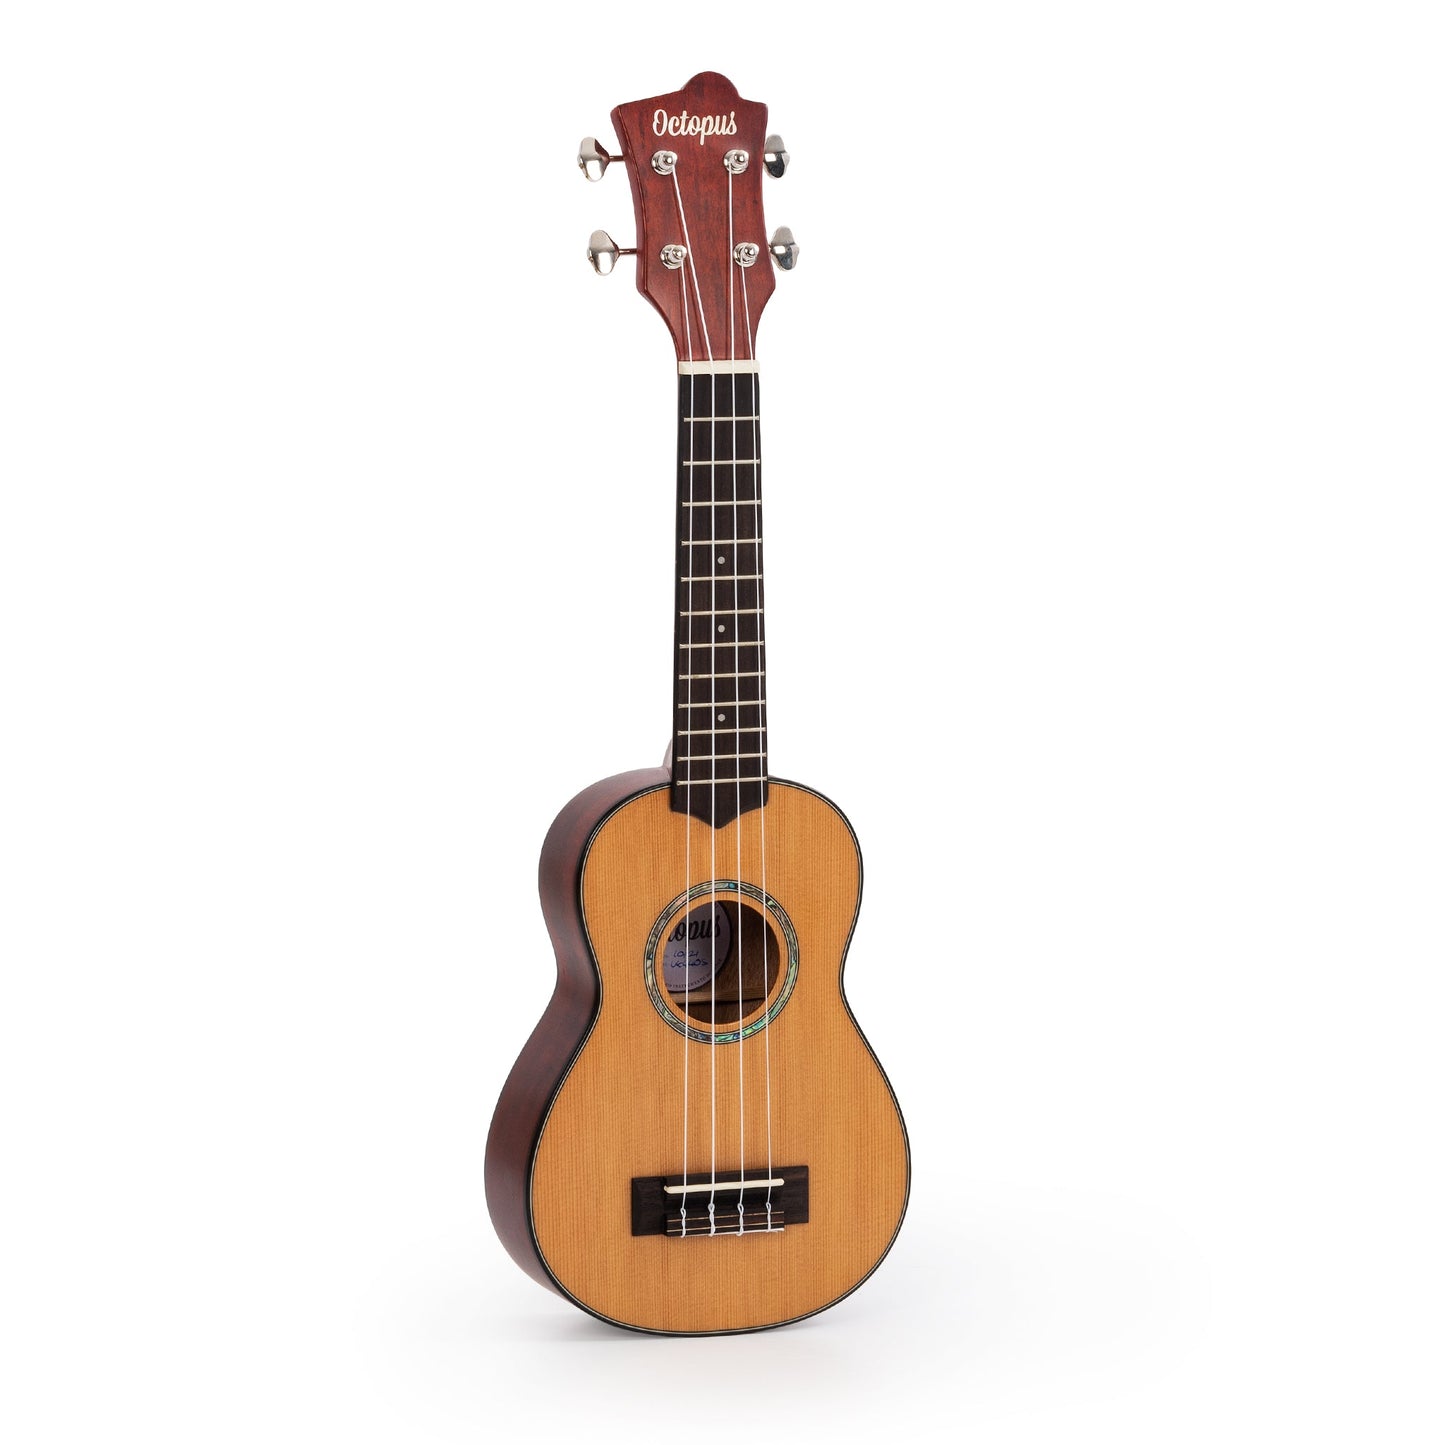 Octopus UK440S Soprano ukulele – Flamed maple with solid cedar top